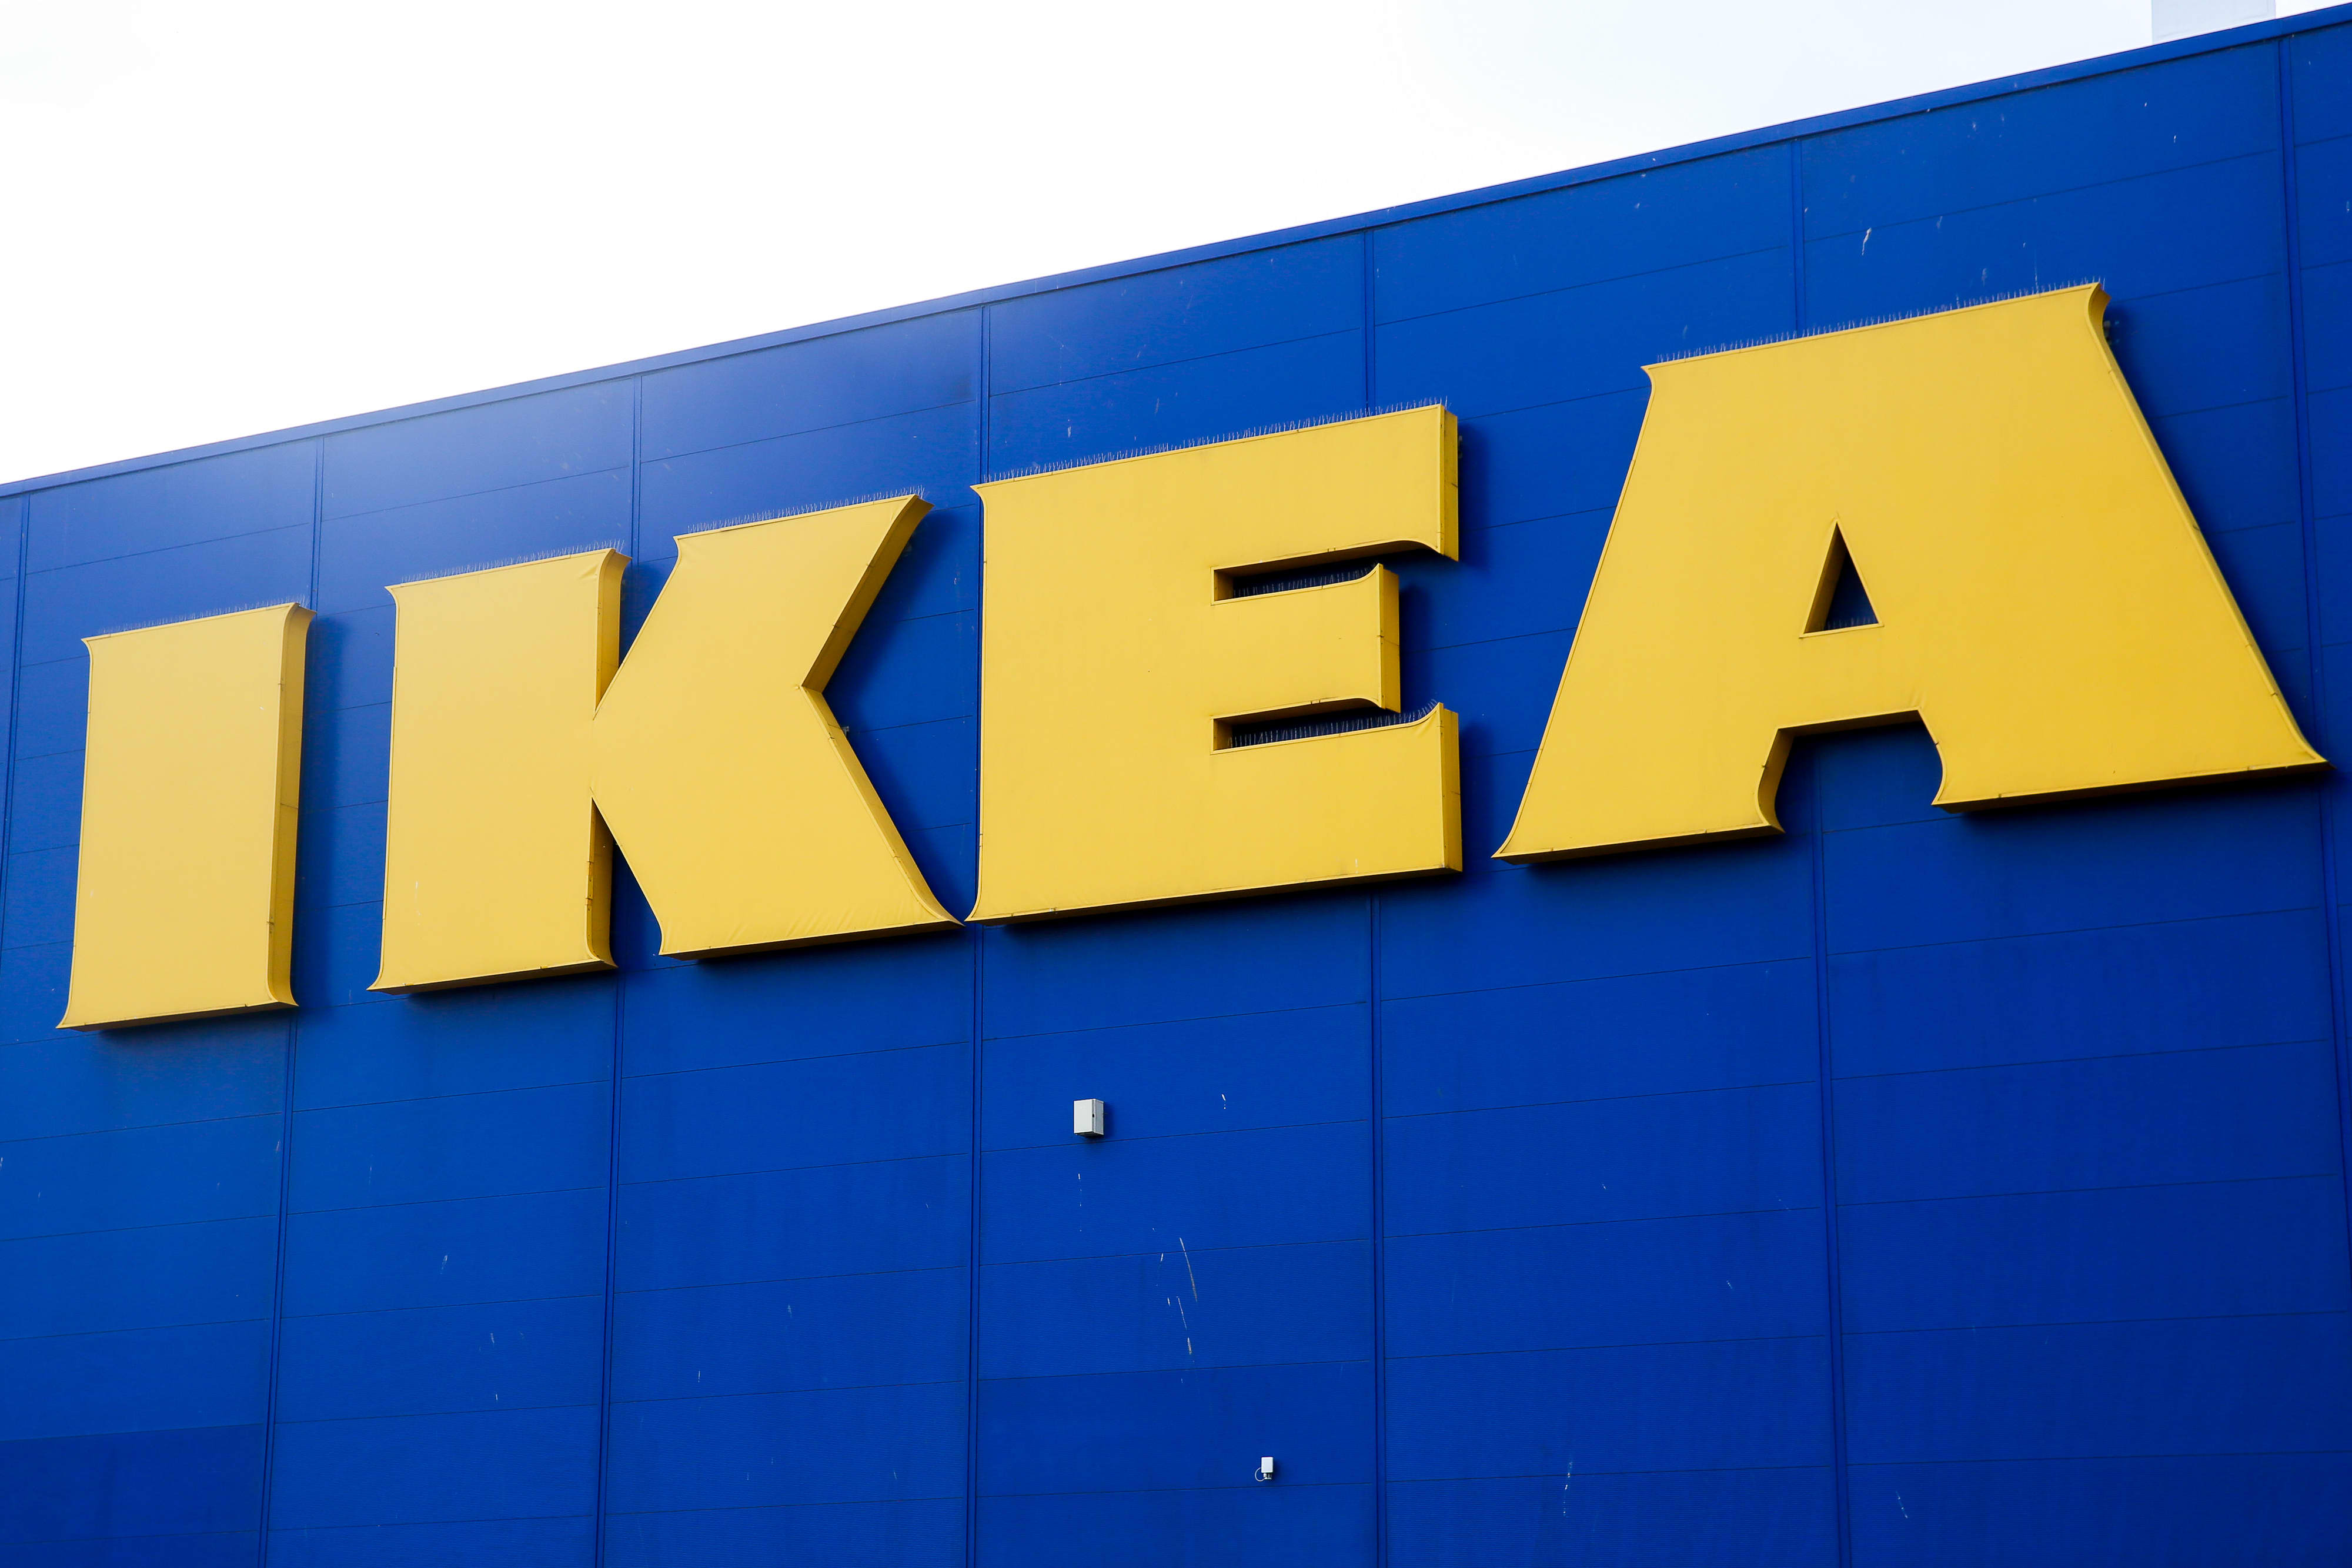 Ikea will invest 2.2 billion dollars in new American store models, collection points